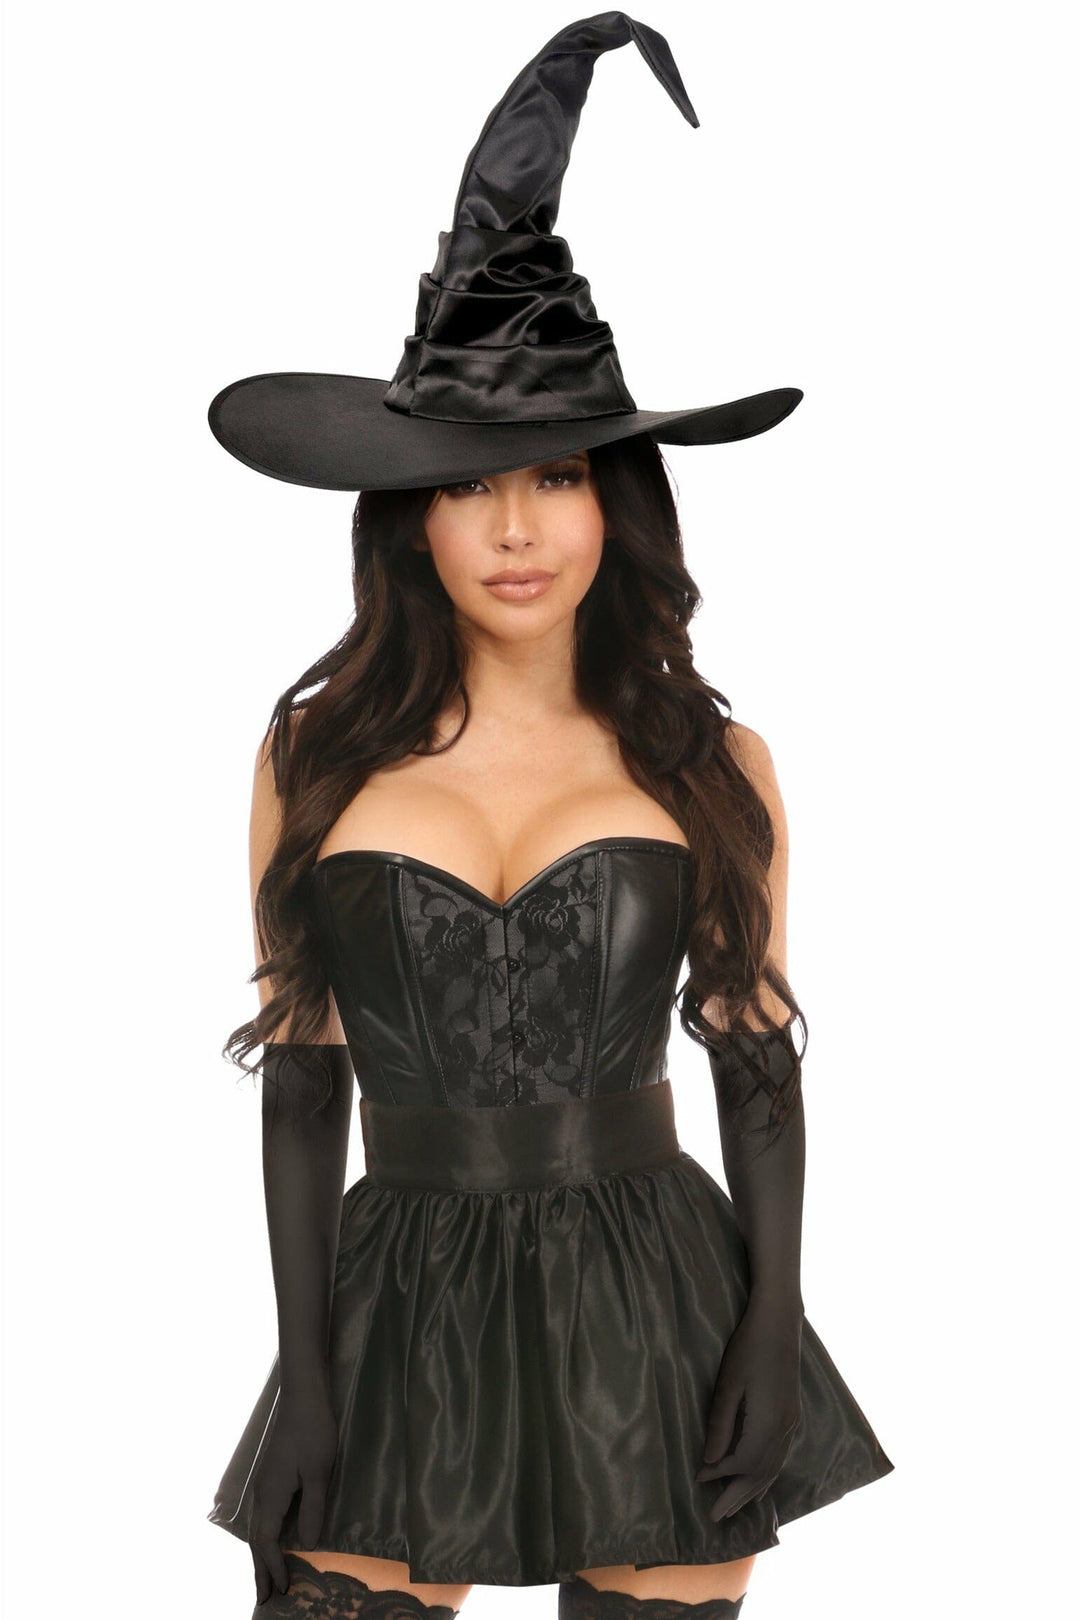 Lavish 4 PC Black Lace Witch Corset Costume-Witch Costumes-Daisy Corsets-SEXYSHOES.COM